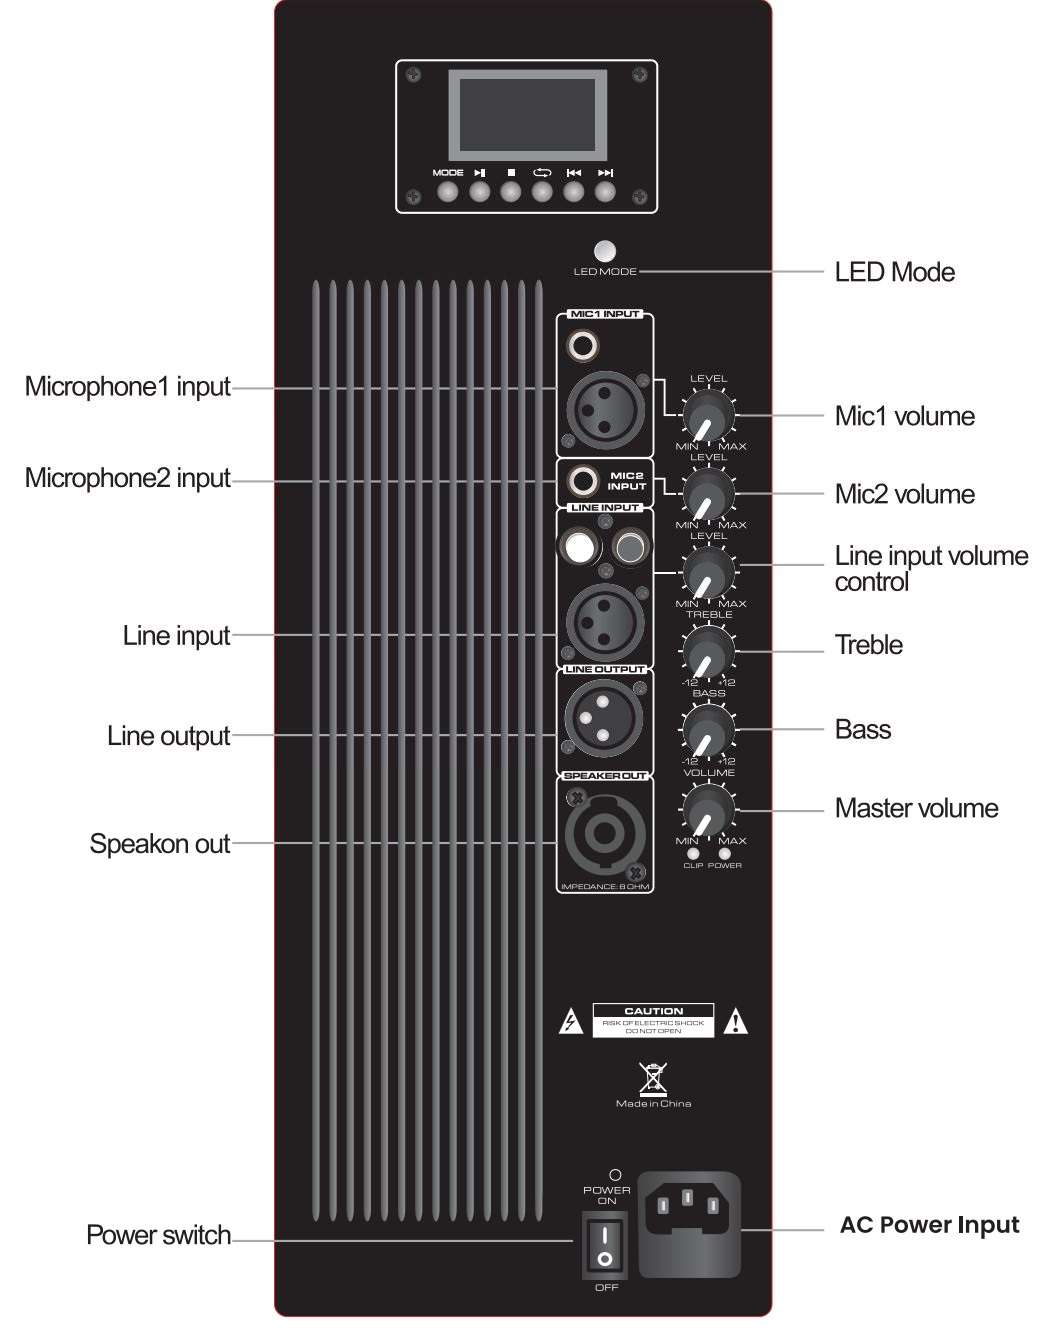 moonki sound MS-P15BW Professional Audio User Manual - Button Overview